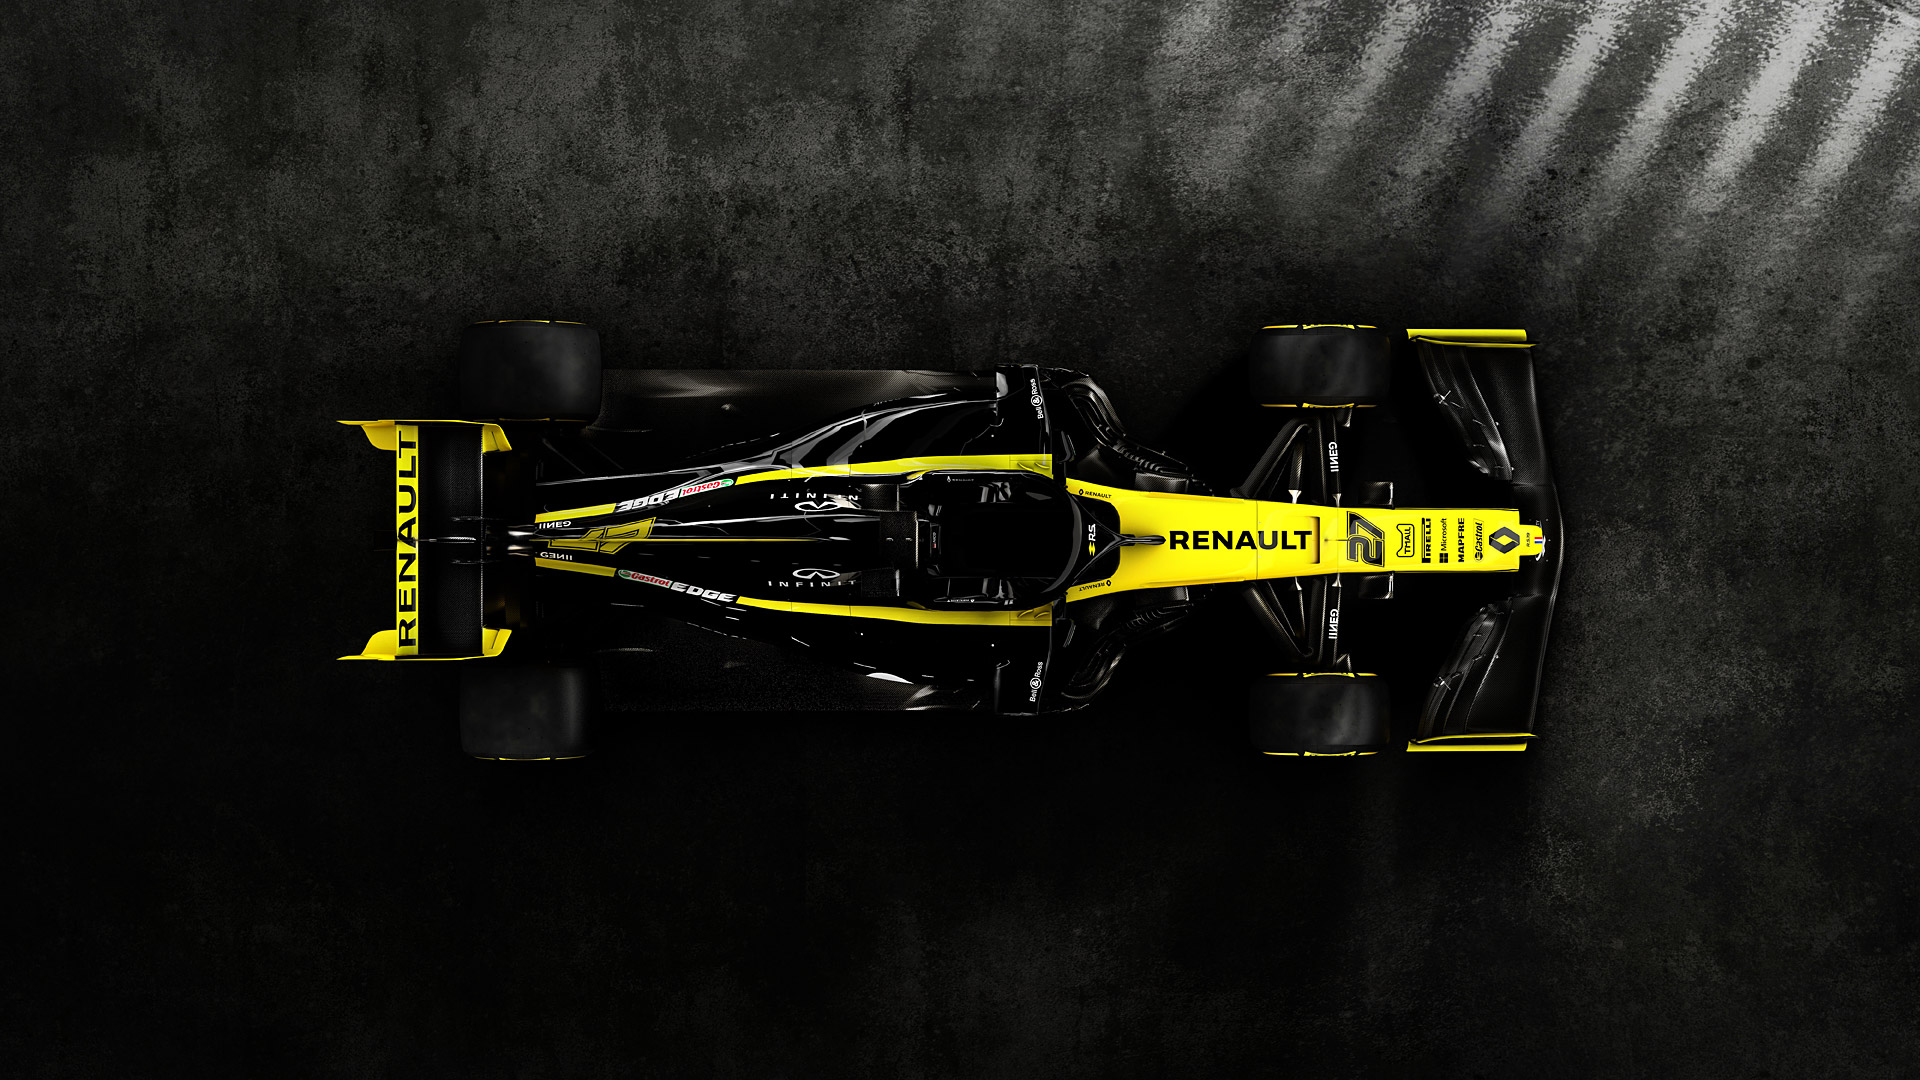 Renault Rs19 Wallpaper HD Image Wsupercars